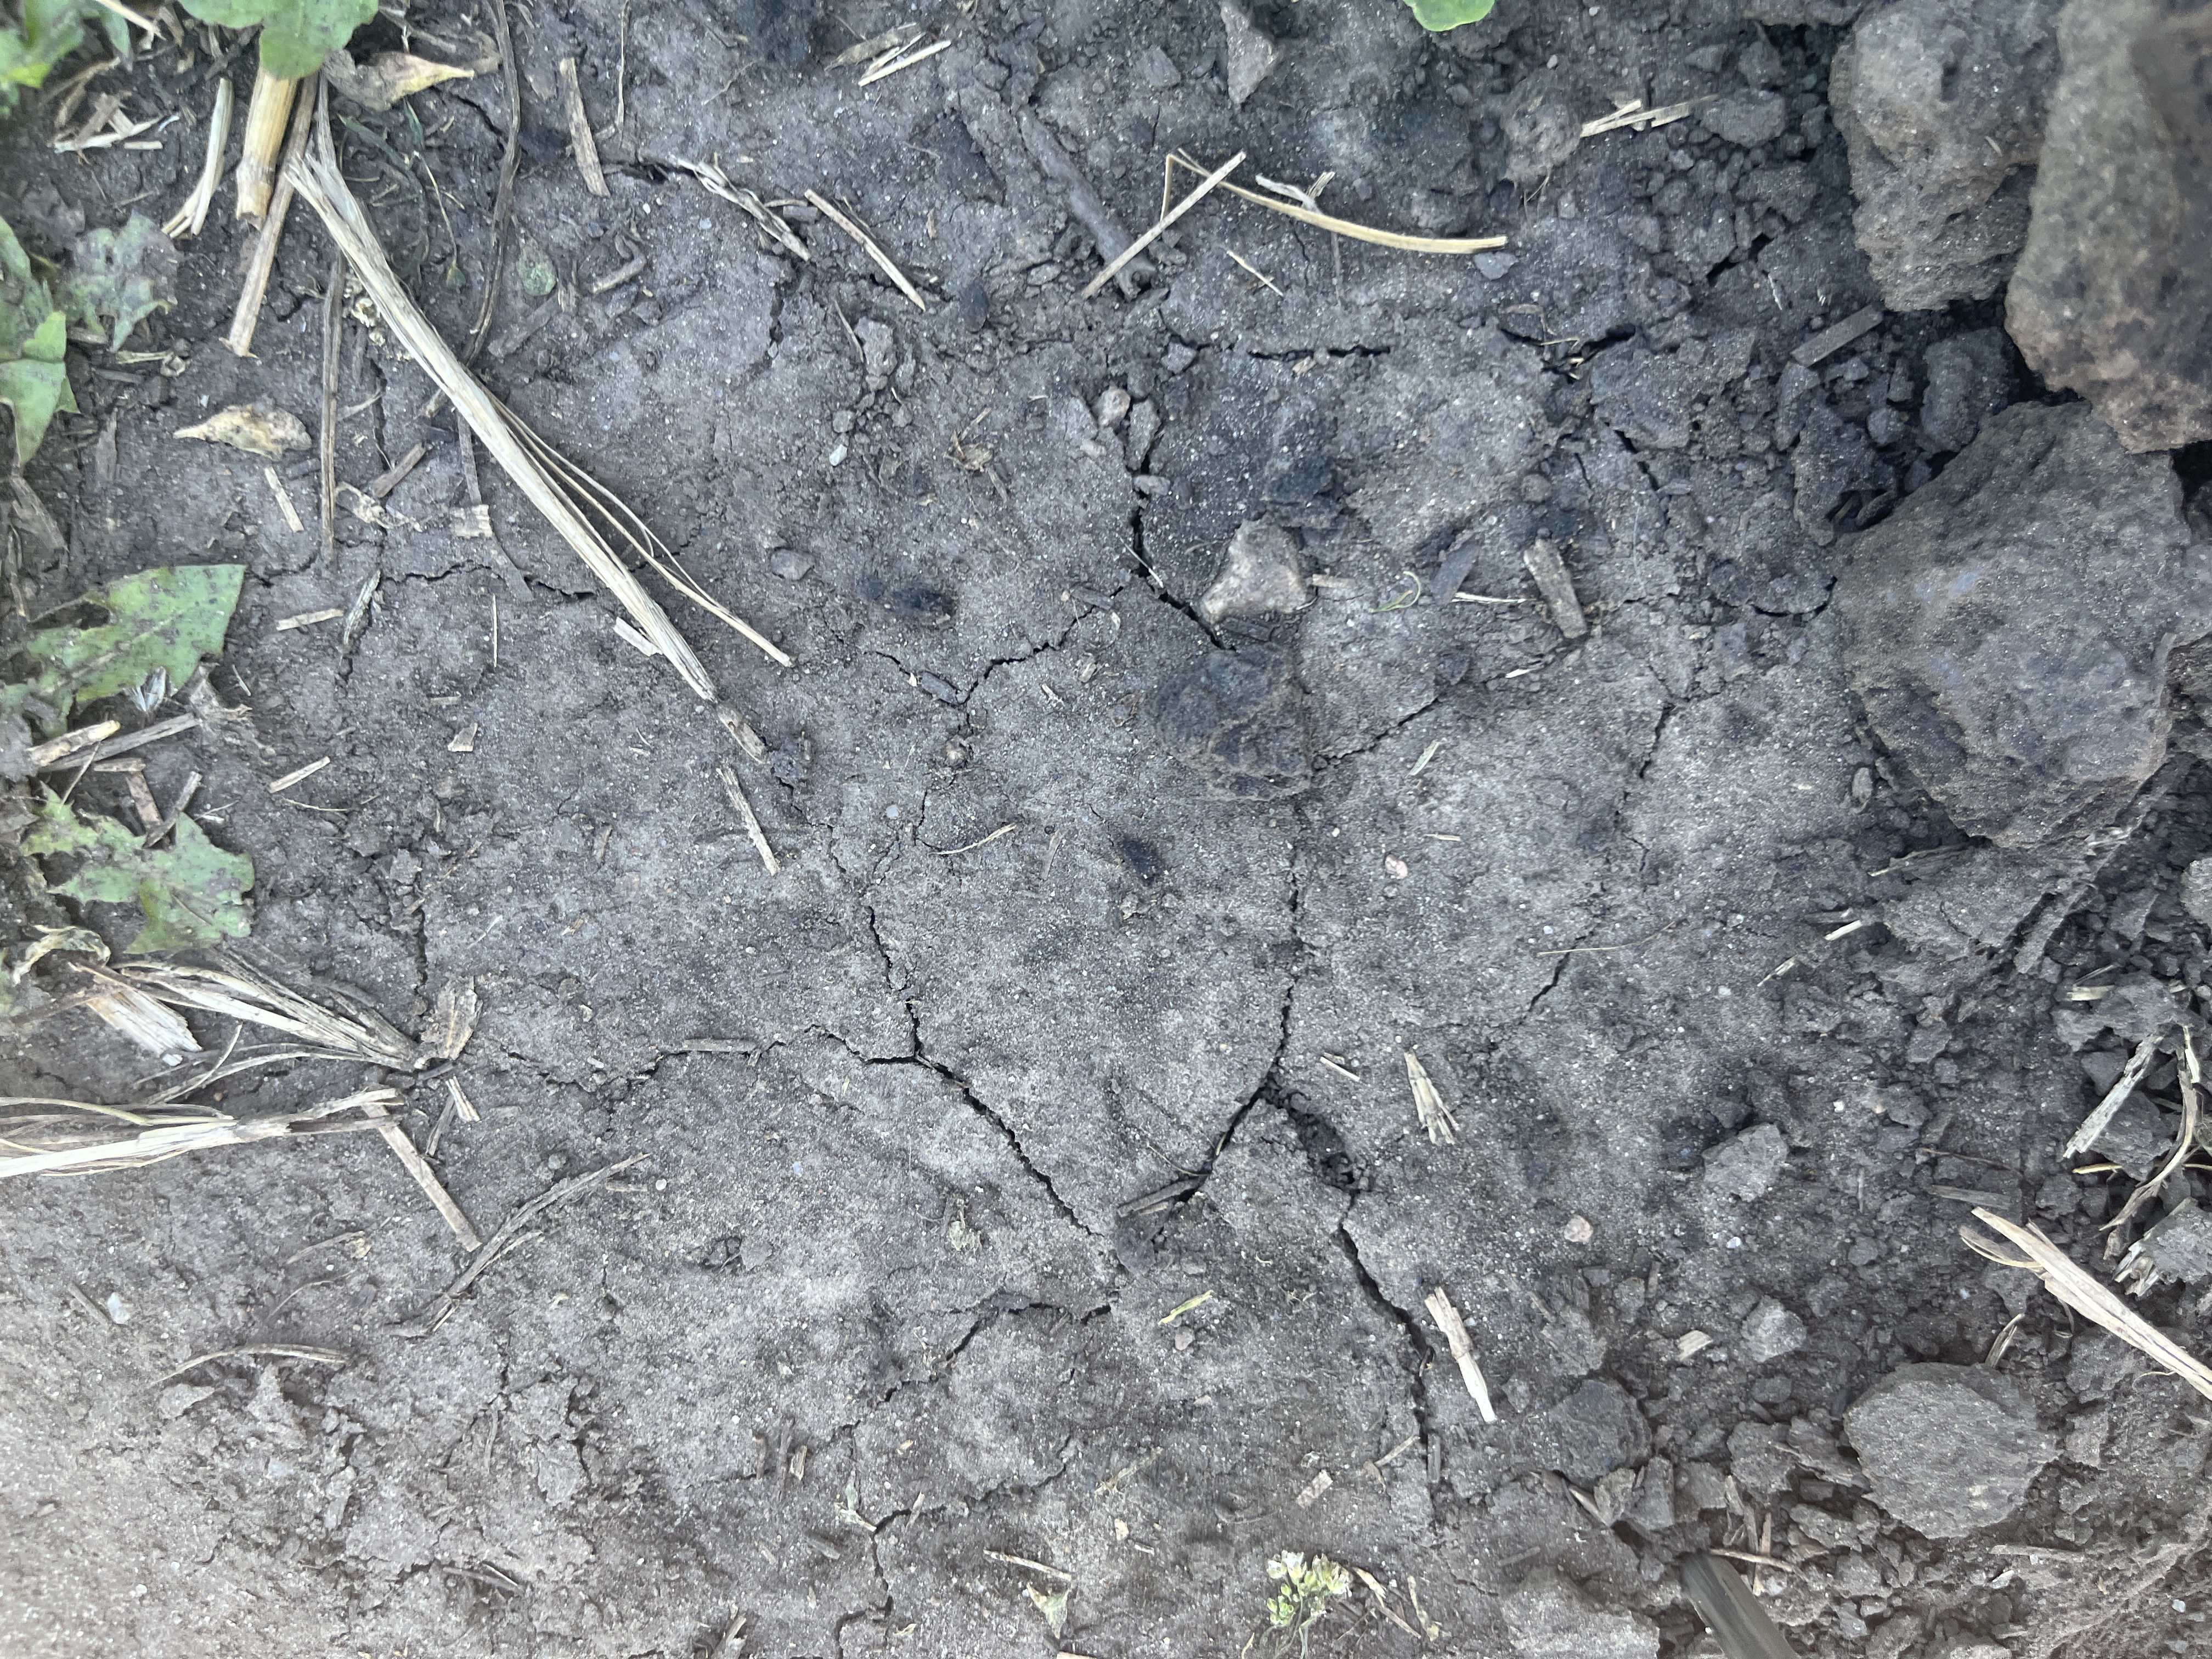 Compacted soil forms a soil crust that cracks in heat.